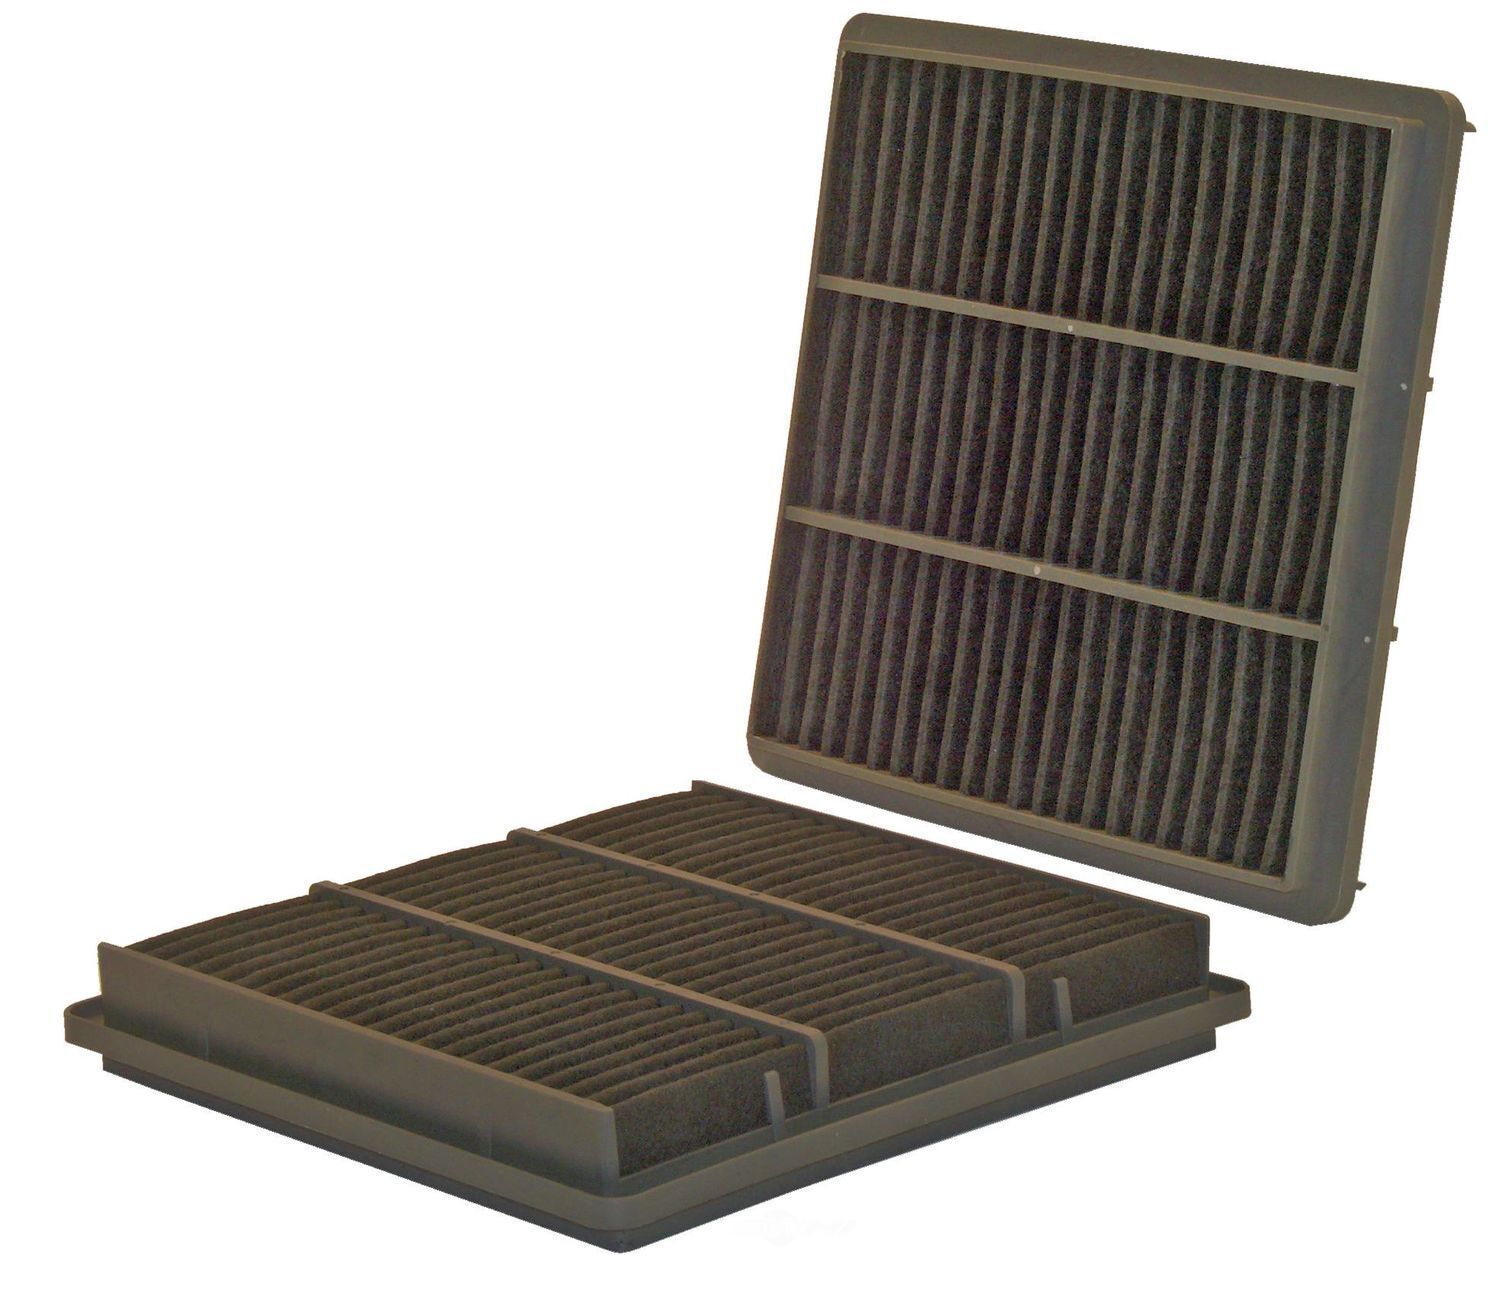 ✅WIX NEW ONE (1) AIR FILTER FITS DODGE STEALTH 91-96 # 46057